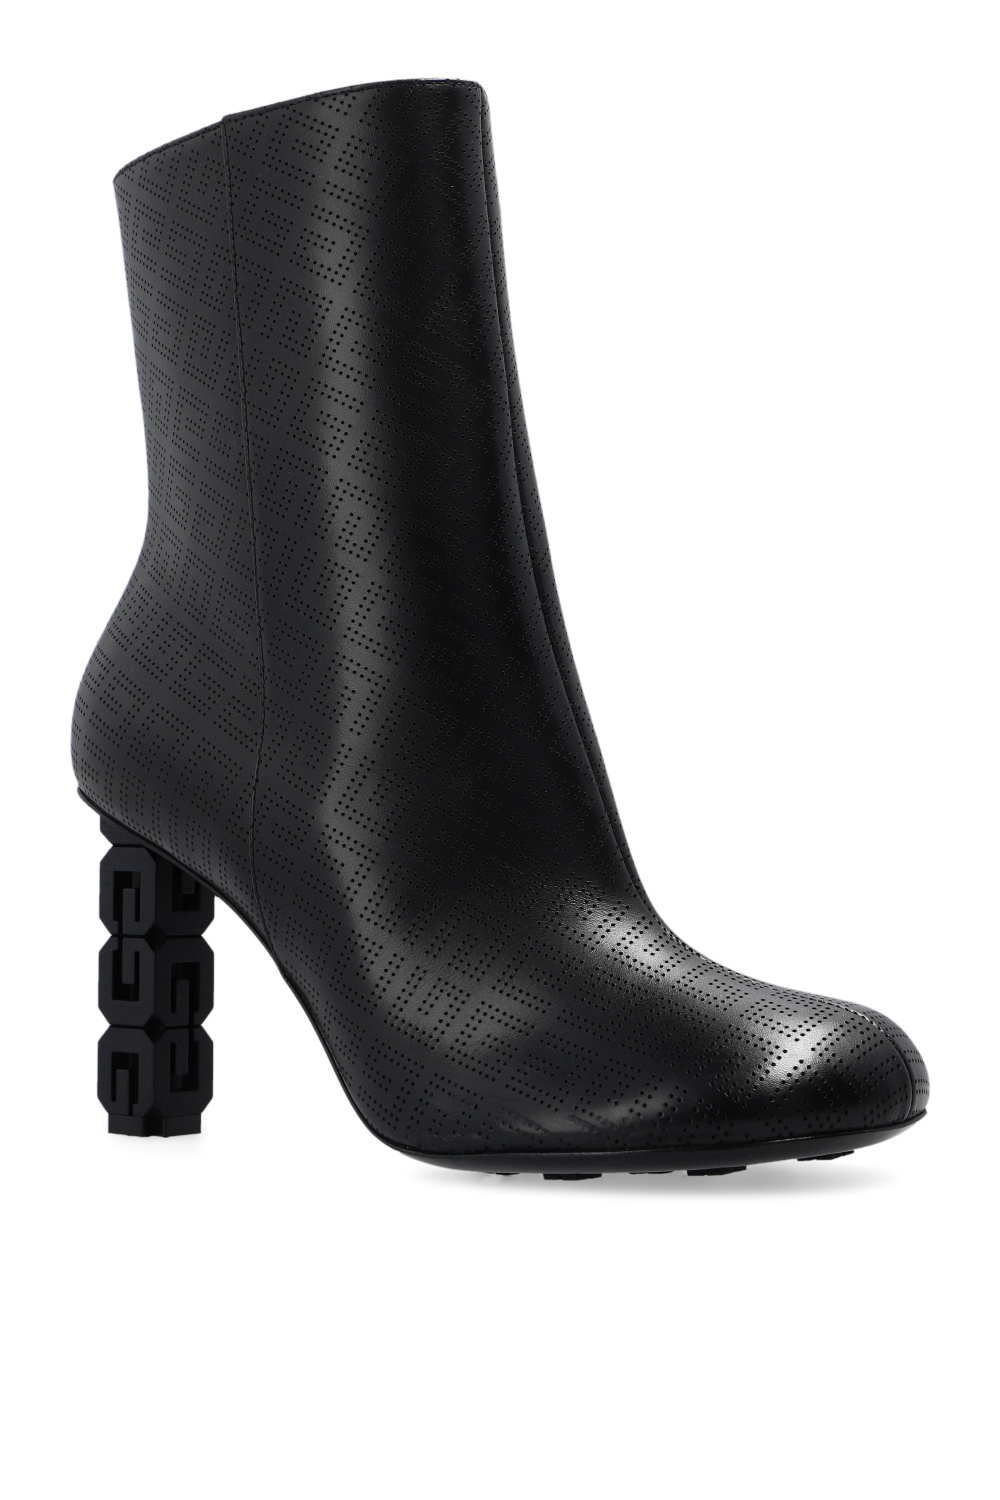 Givenchy ‘G Cube’ womaned ankle boots